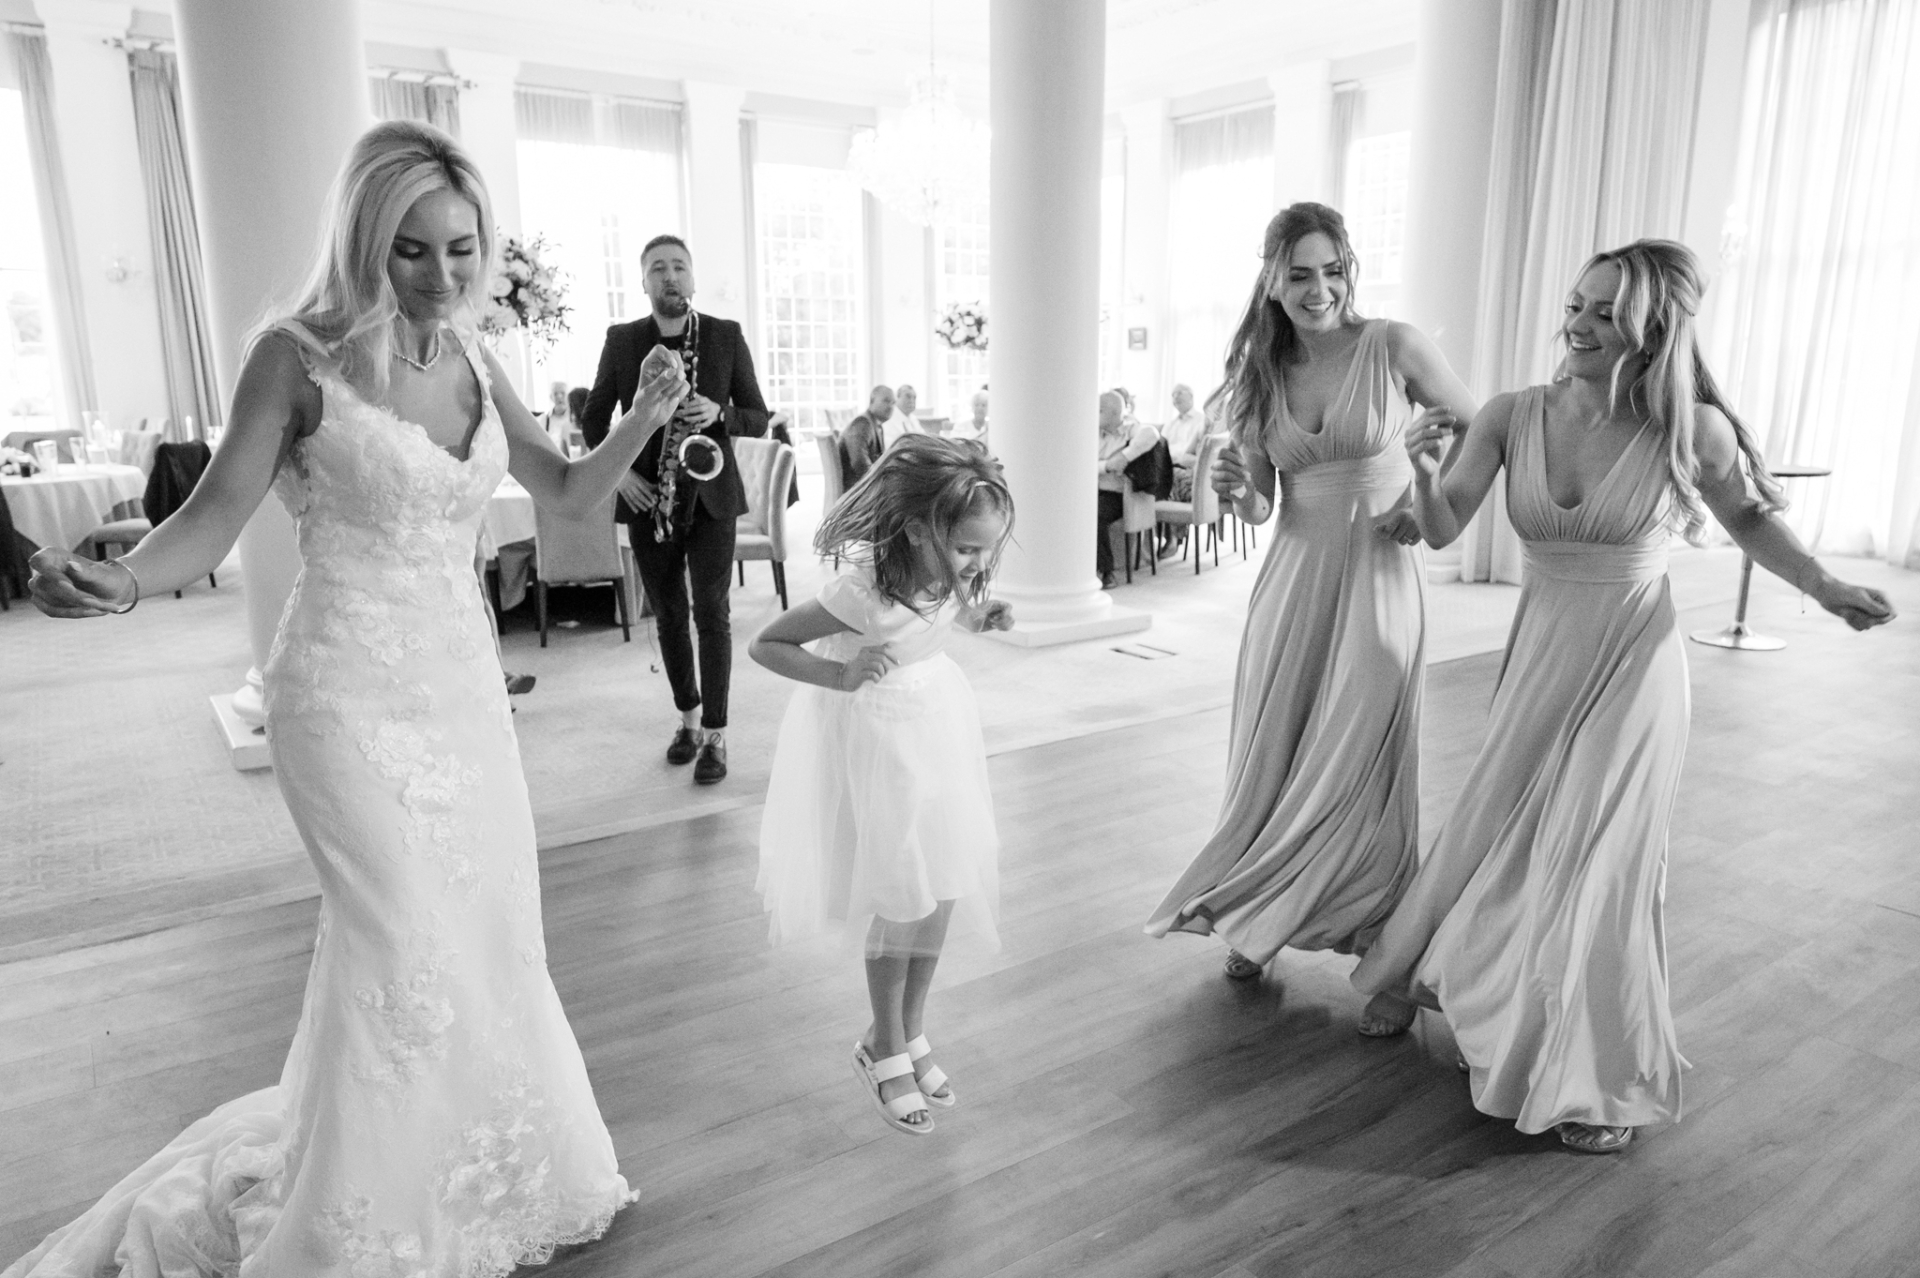 Flower girl jumping in the air as she dances with adult bridesmaids